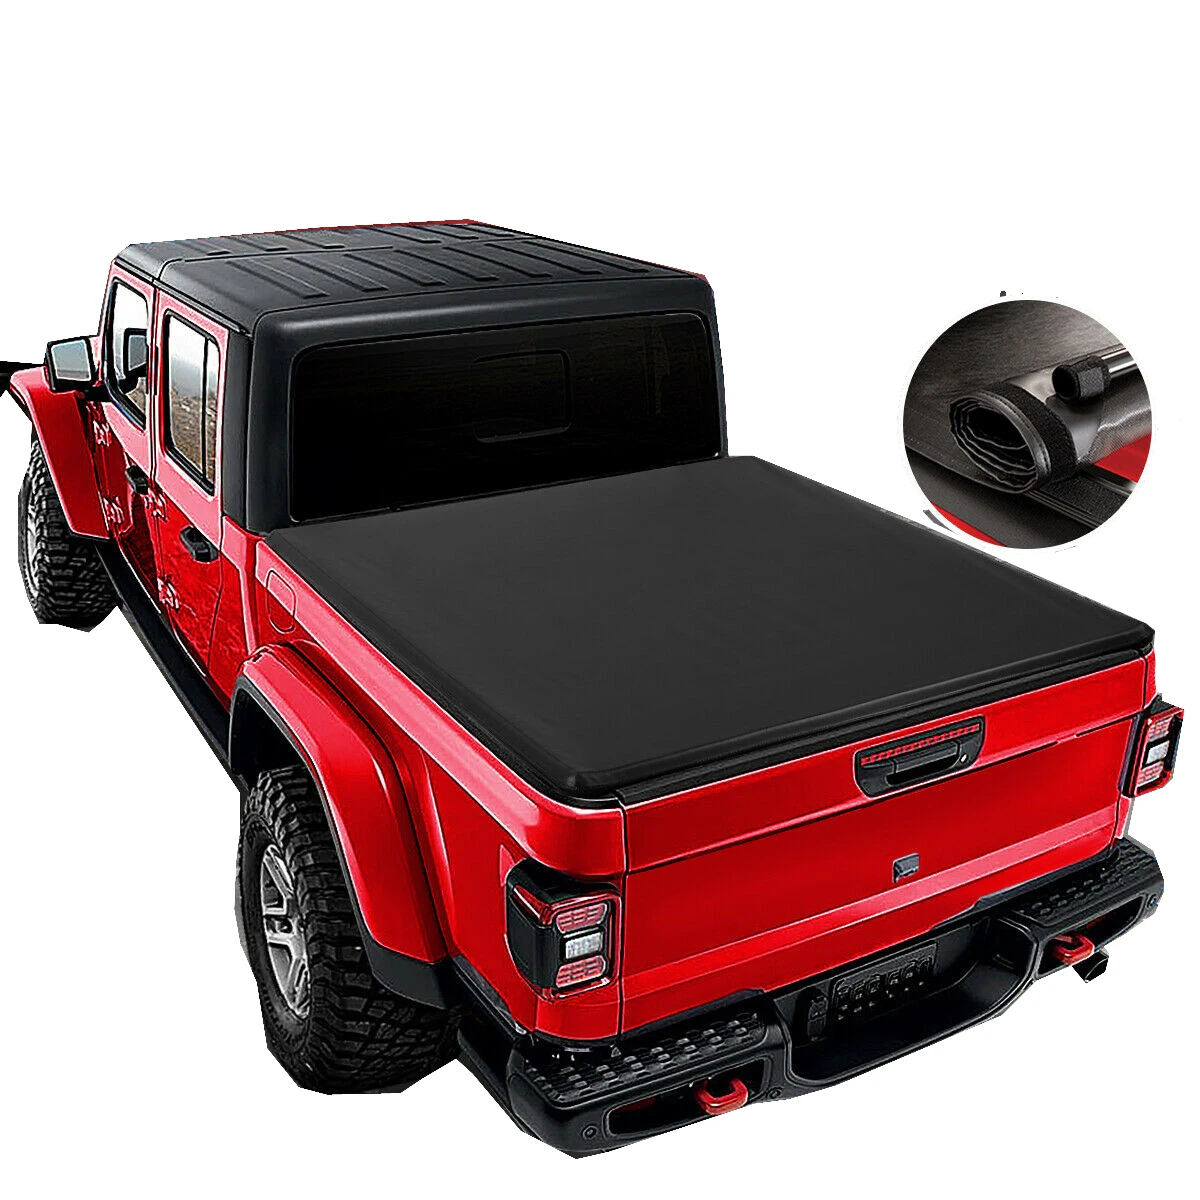 

ROLL UP PICKUP TRUCK BED COVER for Wrangler Gladiator JT TONNEAU COVER 2020 2021